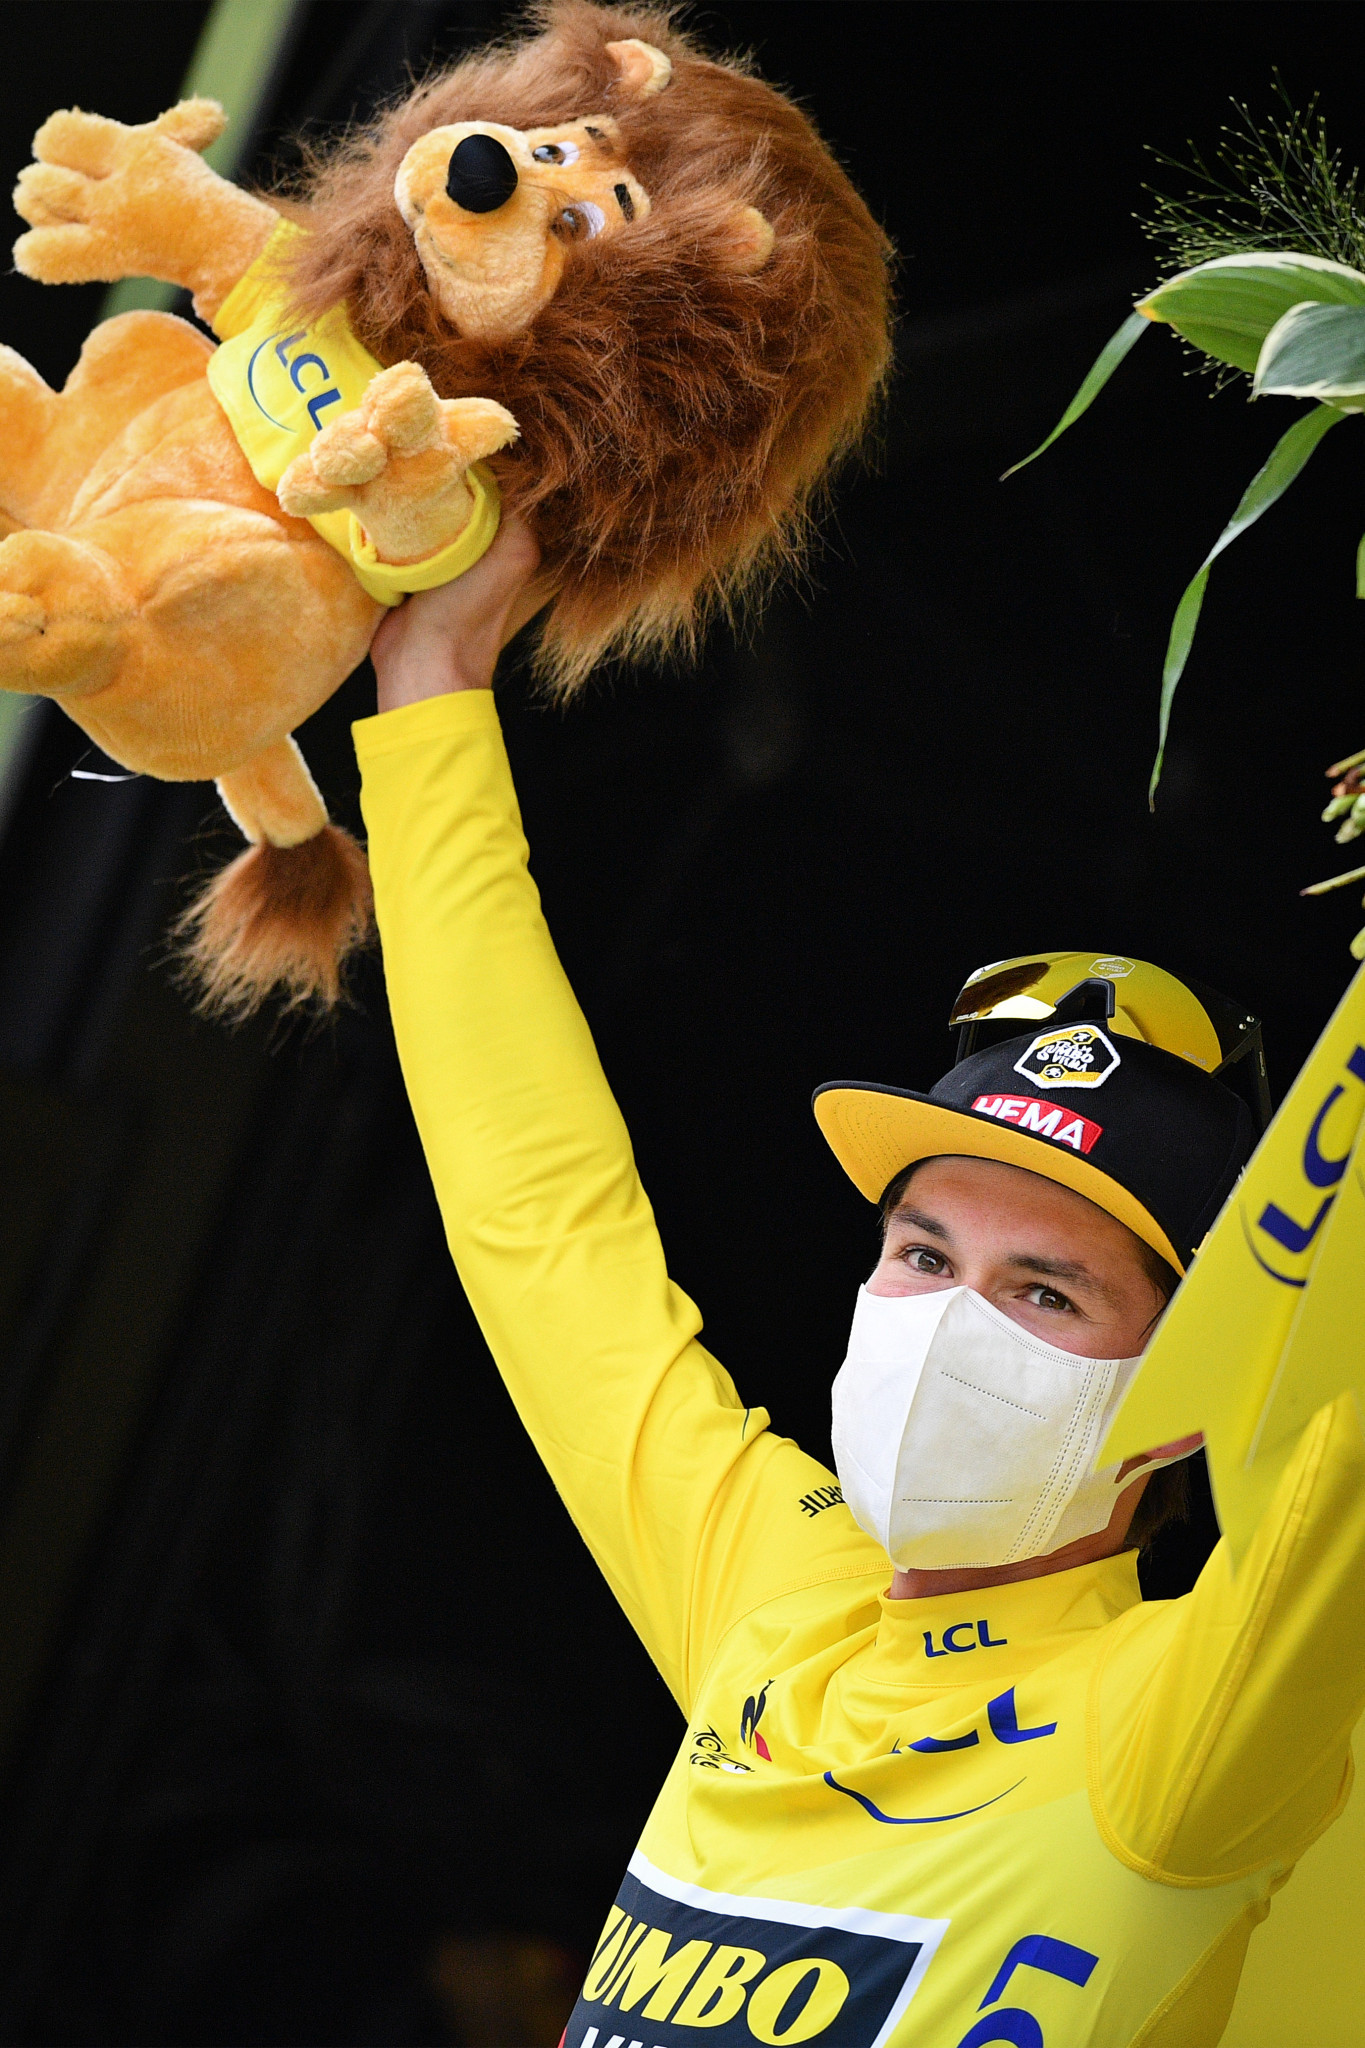 Slovenia's Primož Roglič took the yellow jersey from Adam Yates after finishing in second place on today's ninth stage ©Getty Images